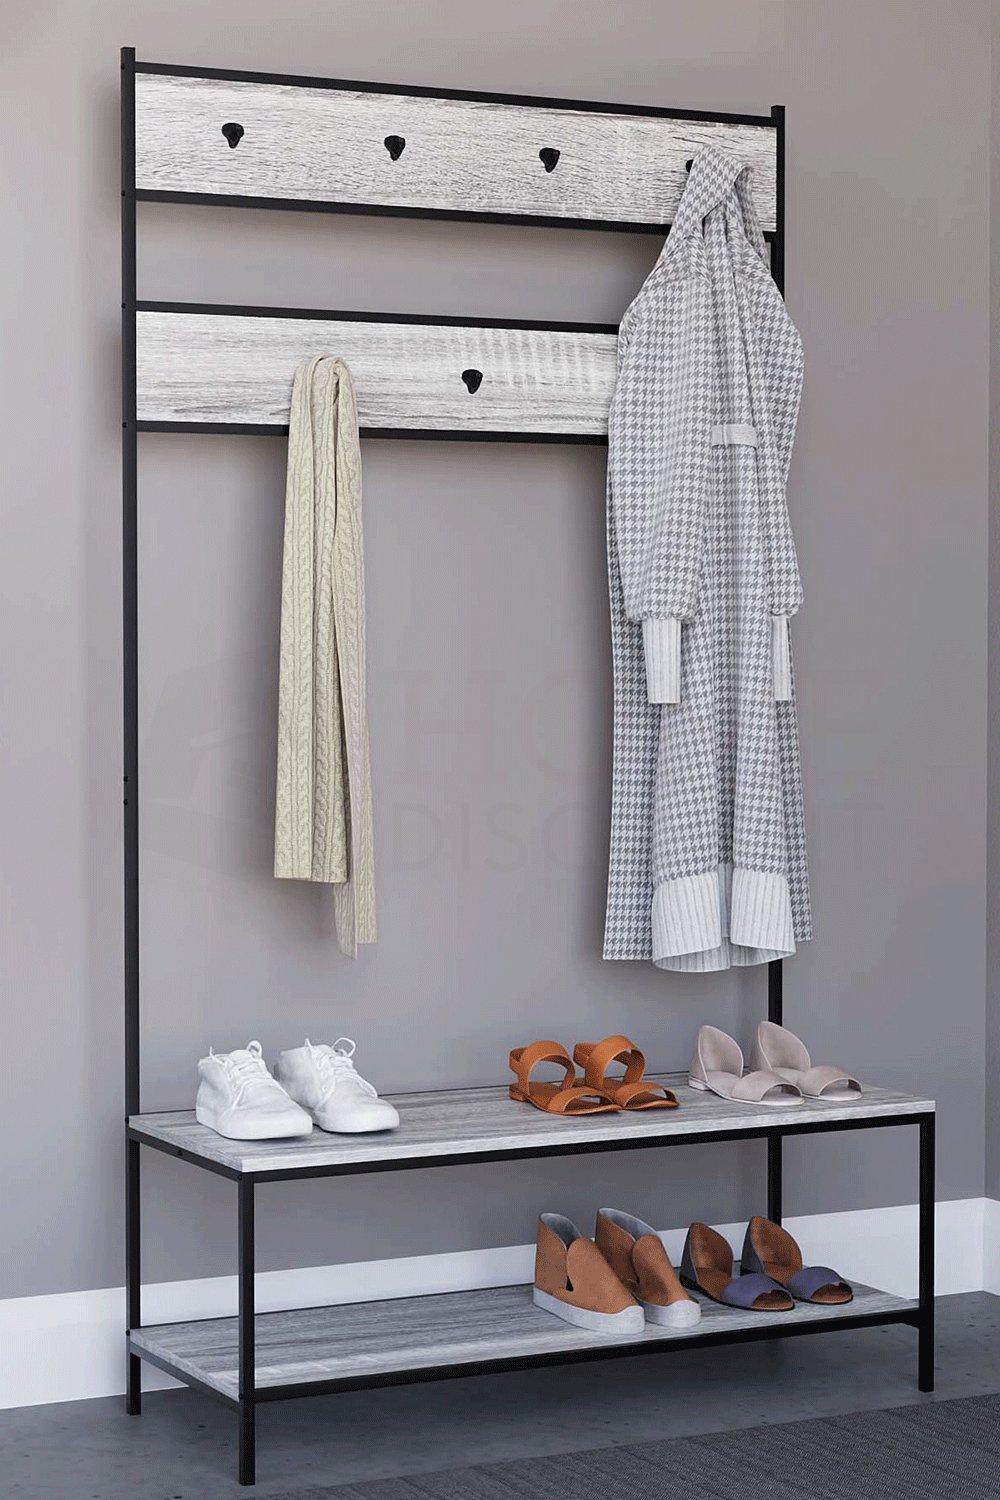 Vida Designs Brooklyn Hallway Unit Hanging Clothes Rack Stand with Storage Shelves